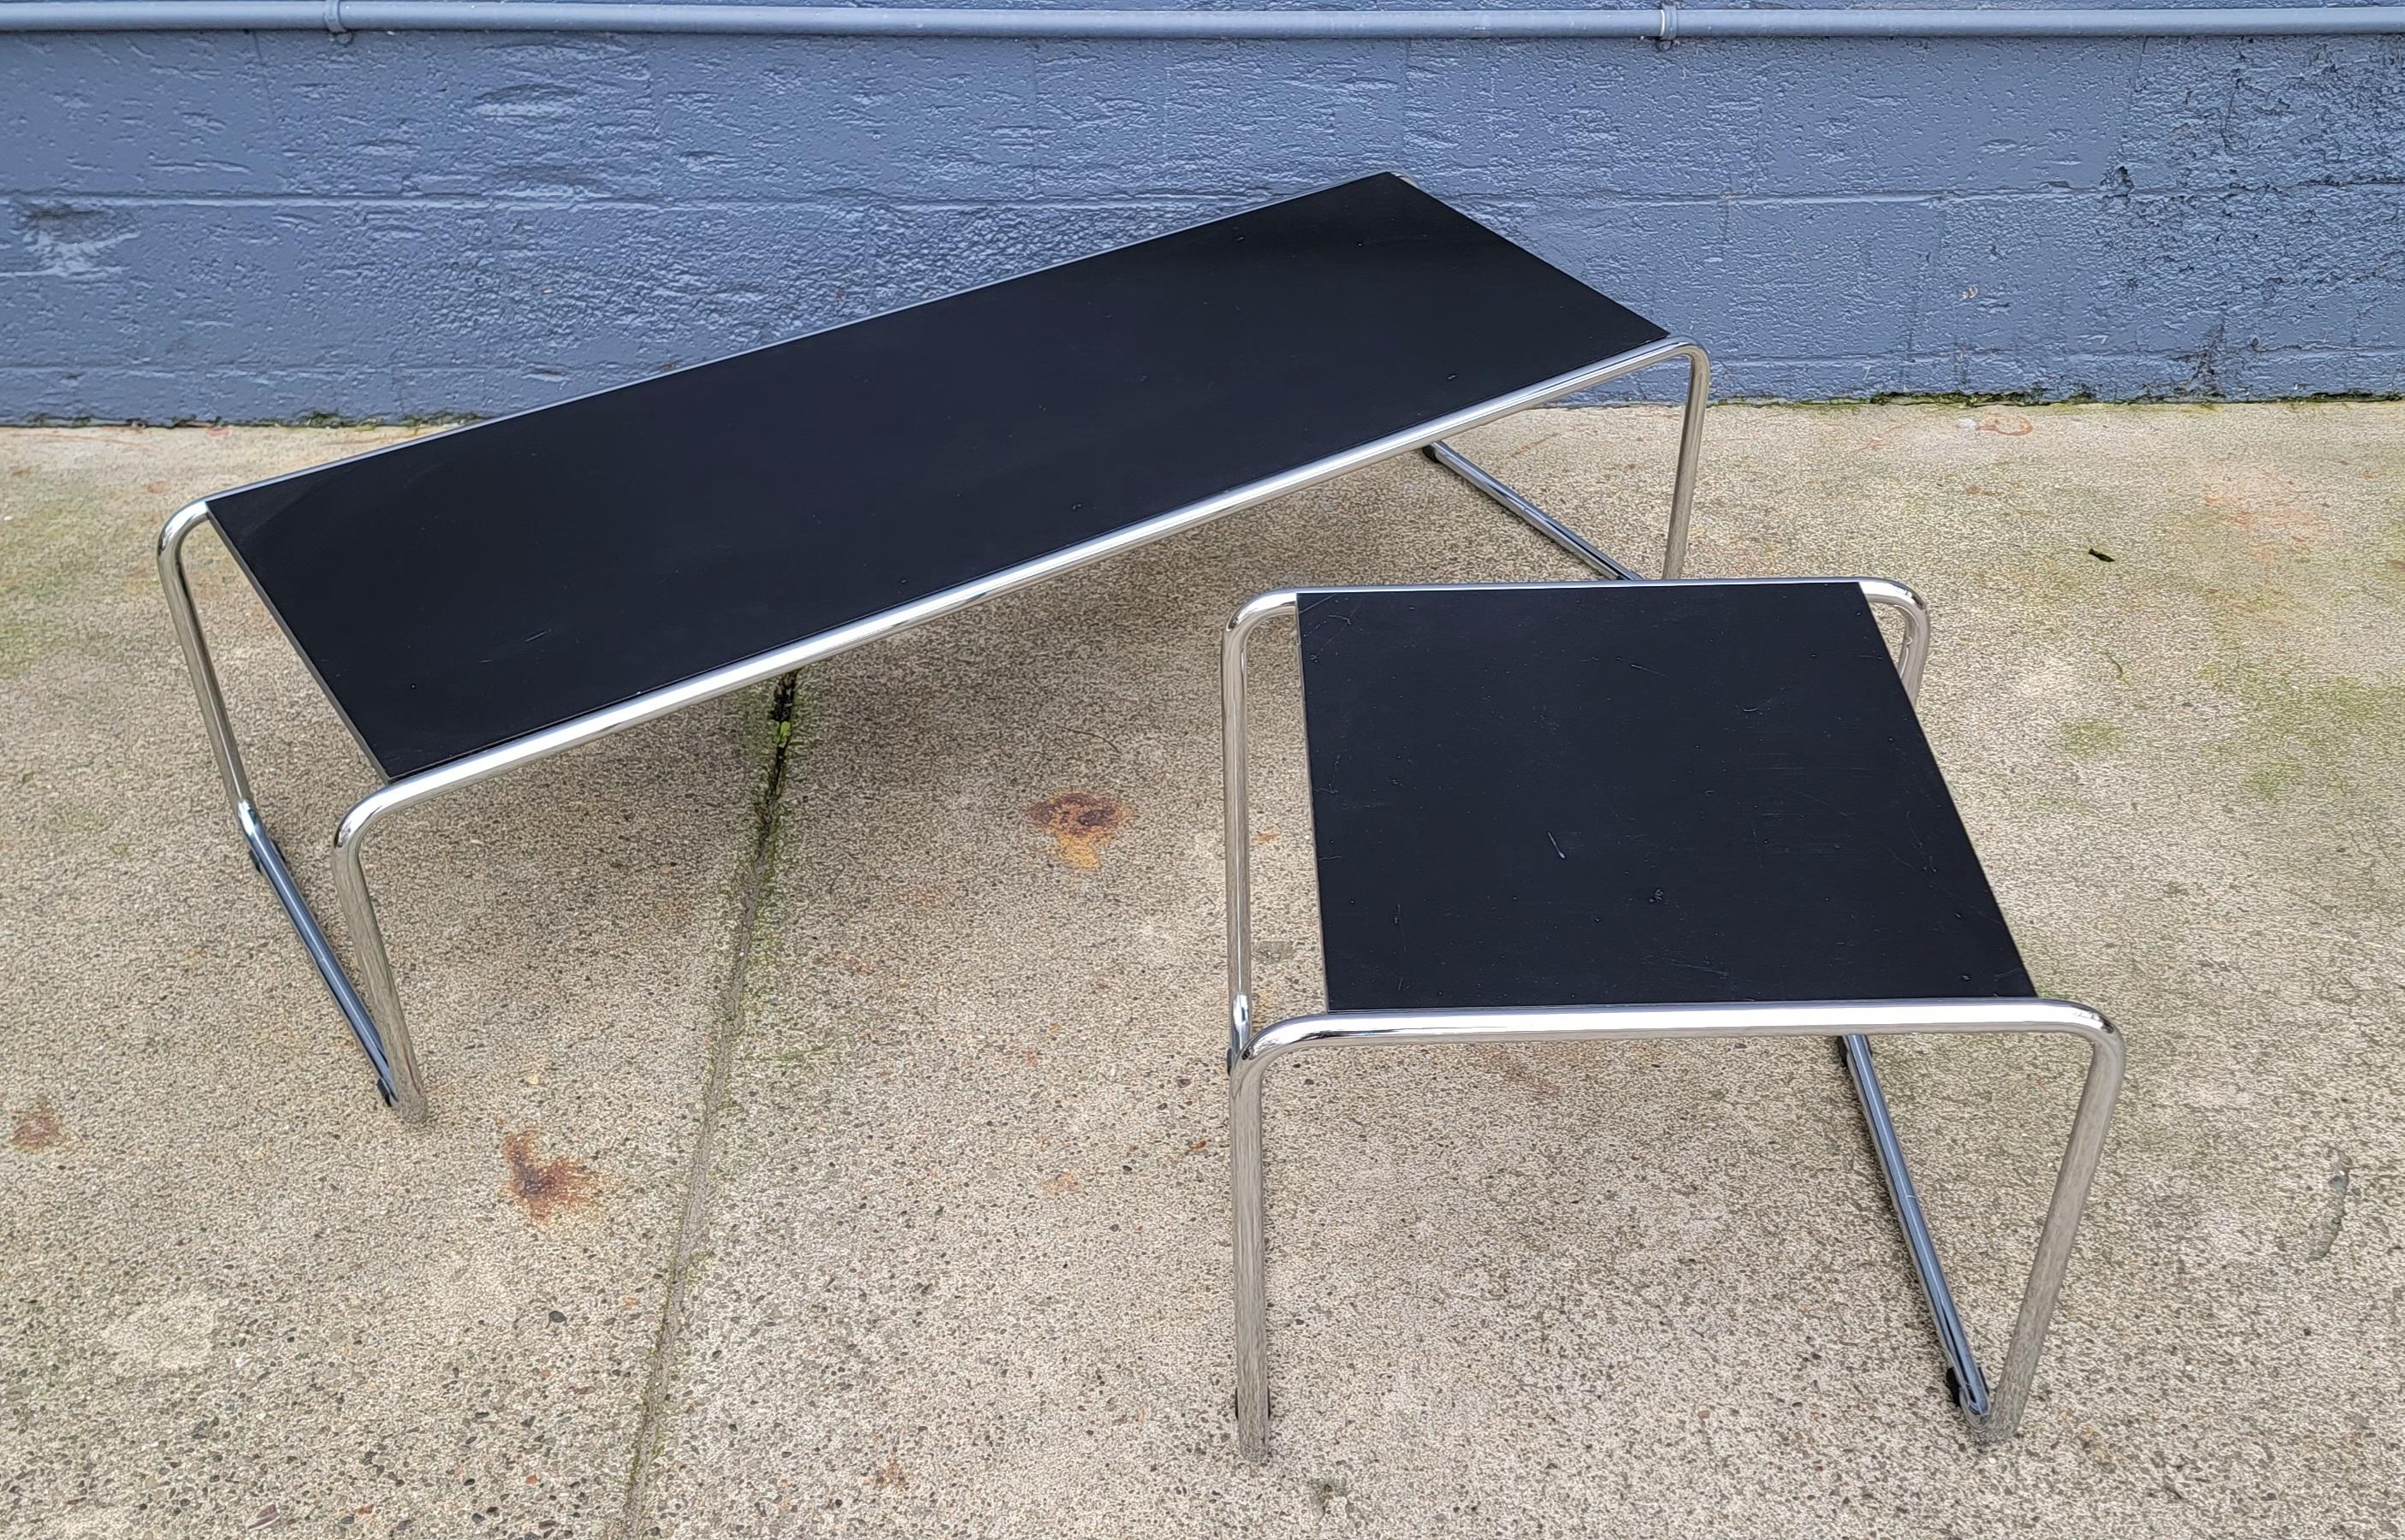 A coffee table and side table attributed to Marcel Breuer for Knoll. (labels missing). Black laminate table tops with polished chrome bases. All glides intact. Chrome in excellent condition, scuffs and scratches to table tops. Side table measures